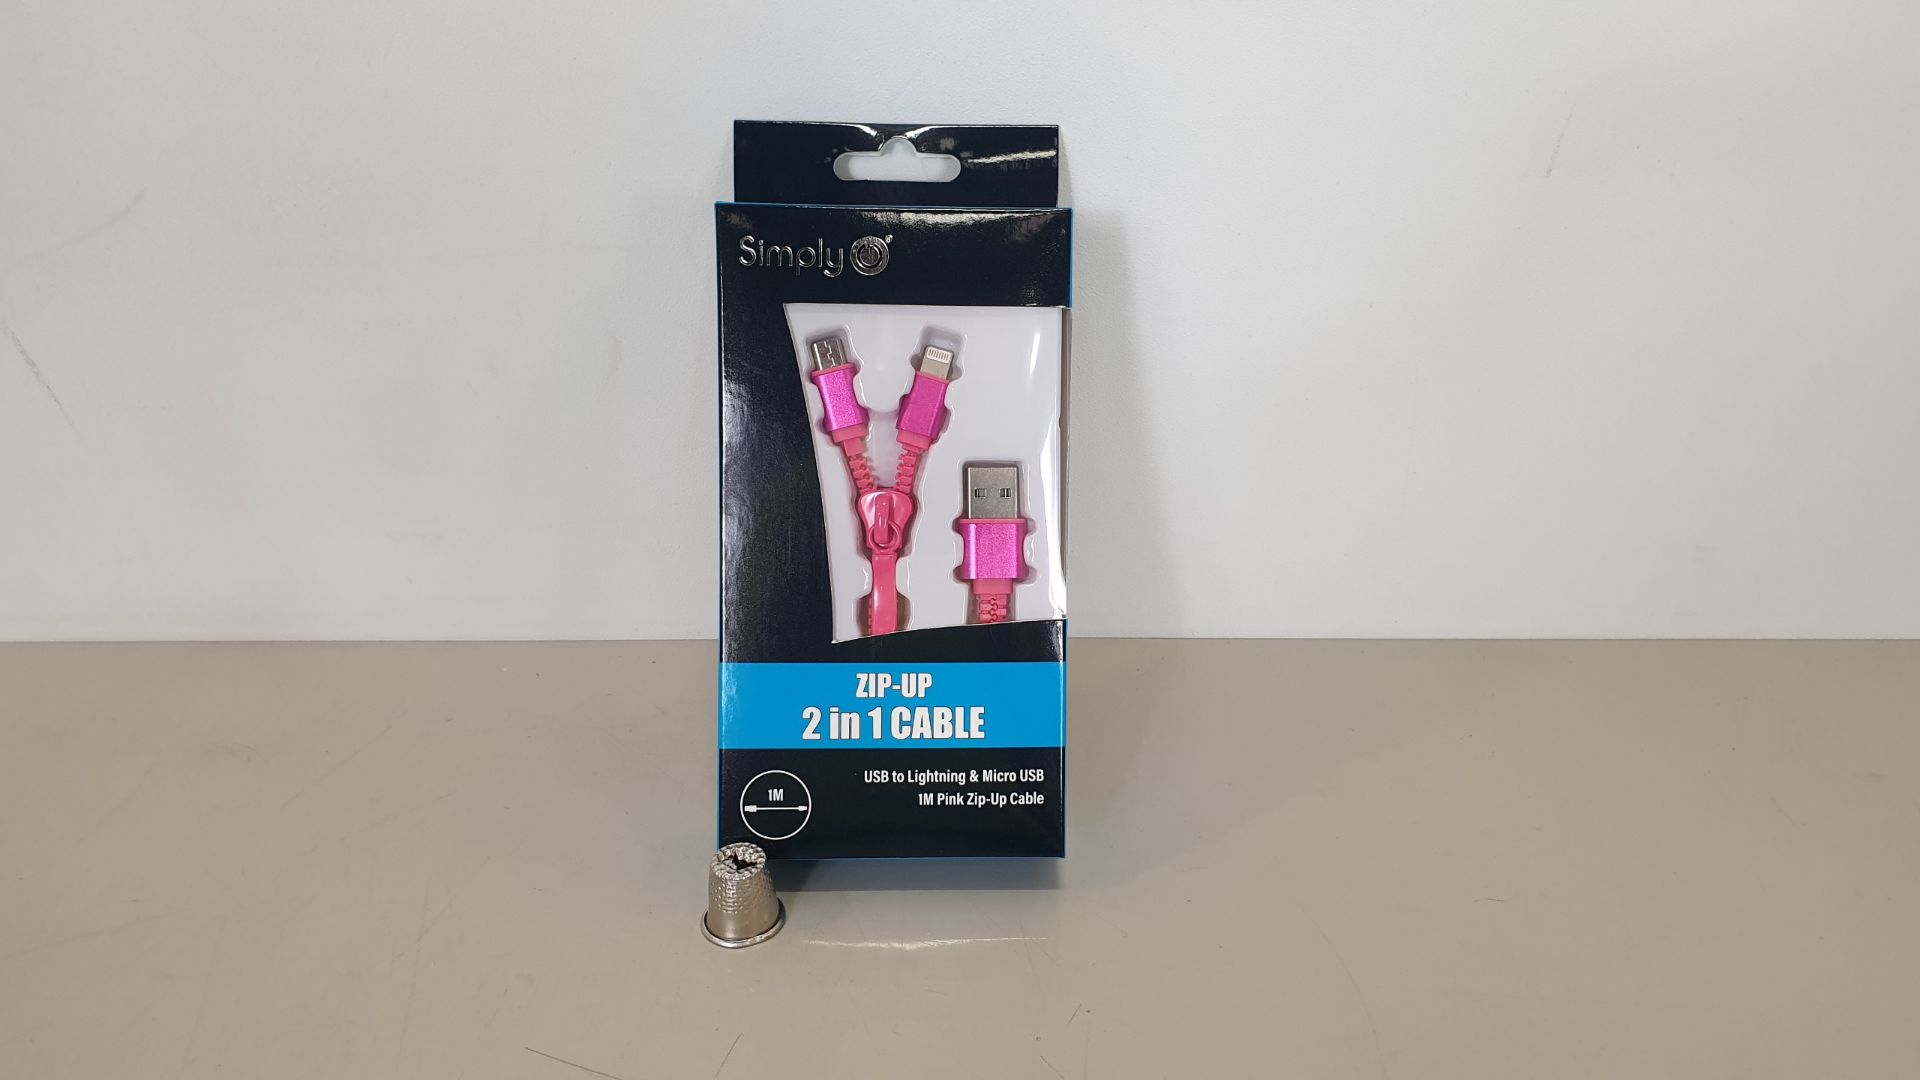 100 X BRAND NEW SIMPLY ZIP-UP 2 IN 1 CABLE - USB TO LIGHTNING & MICRO USB 1M PINK ZIP-UP CABLE -